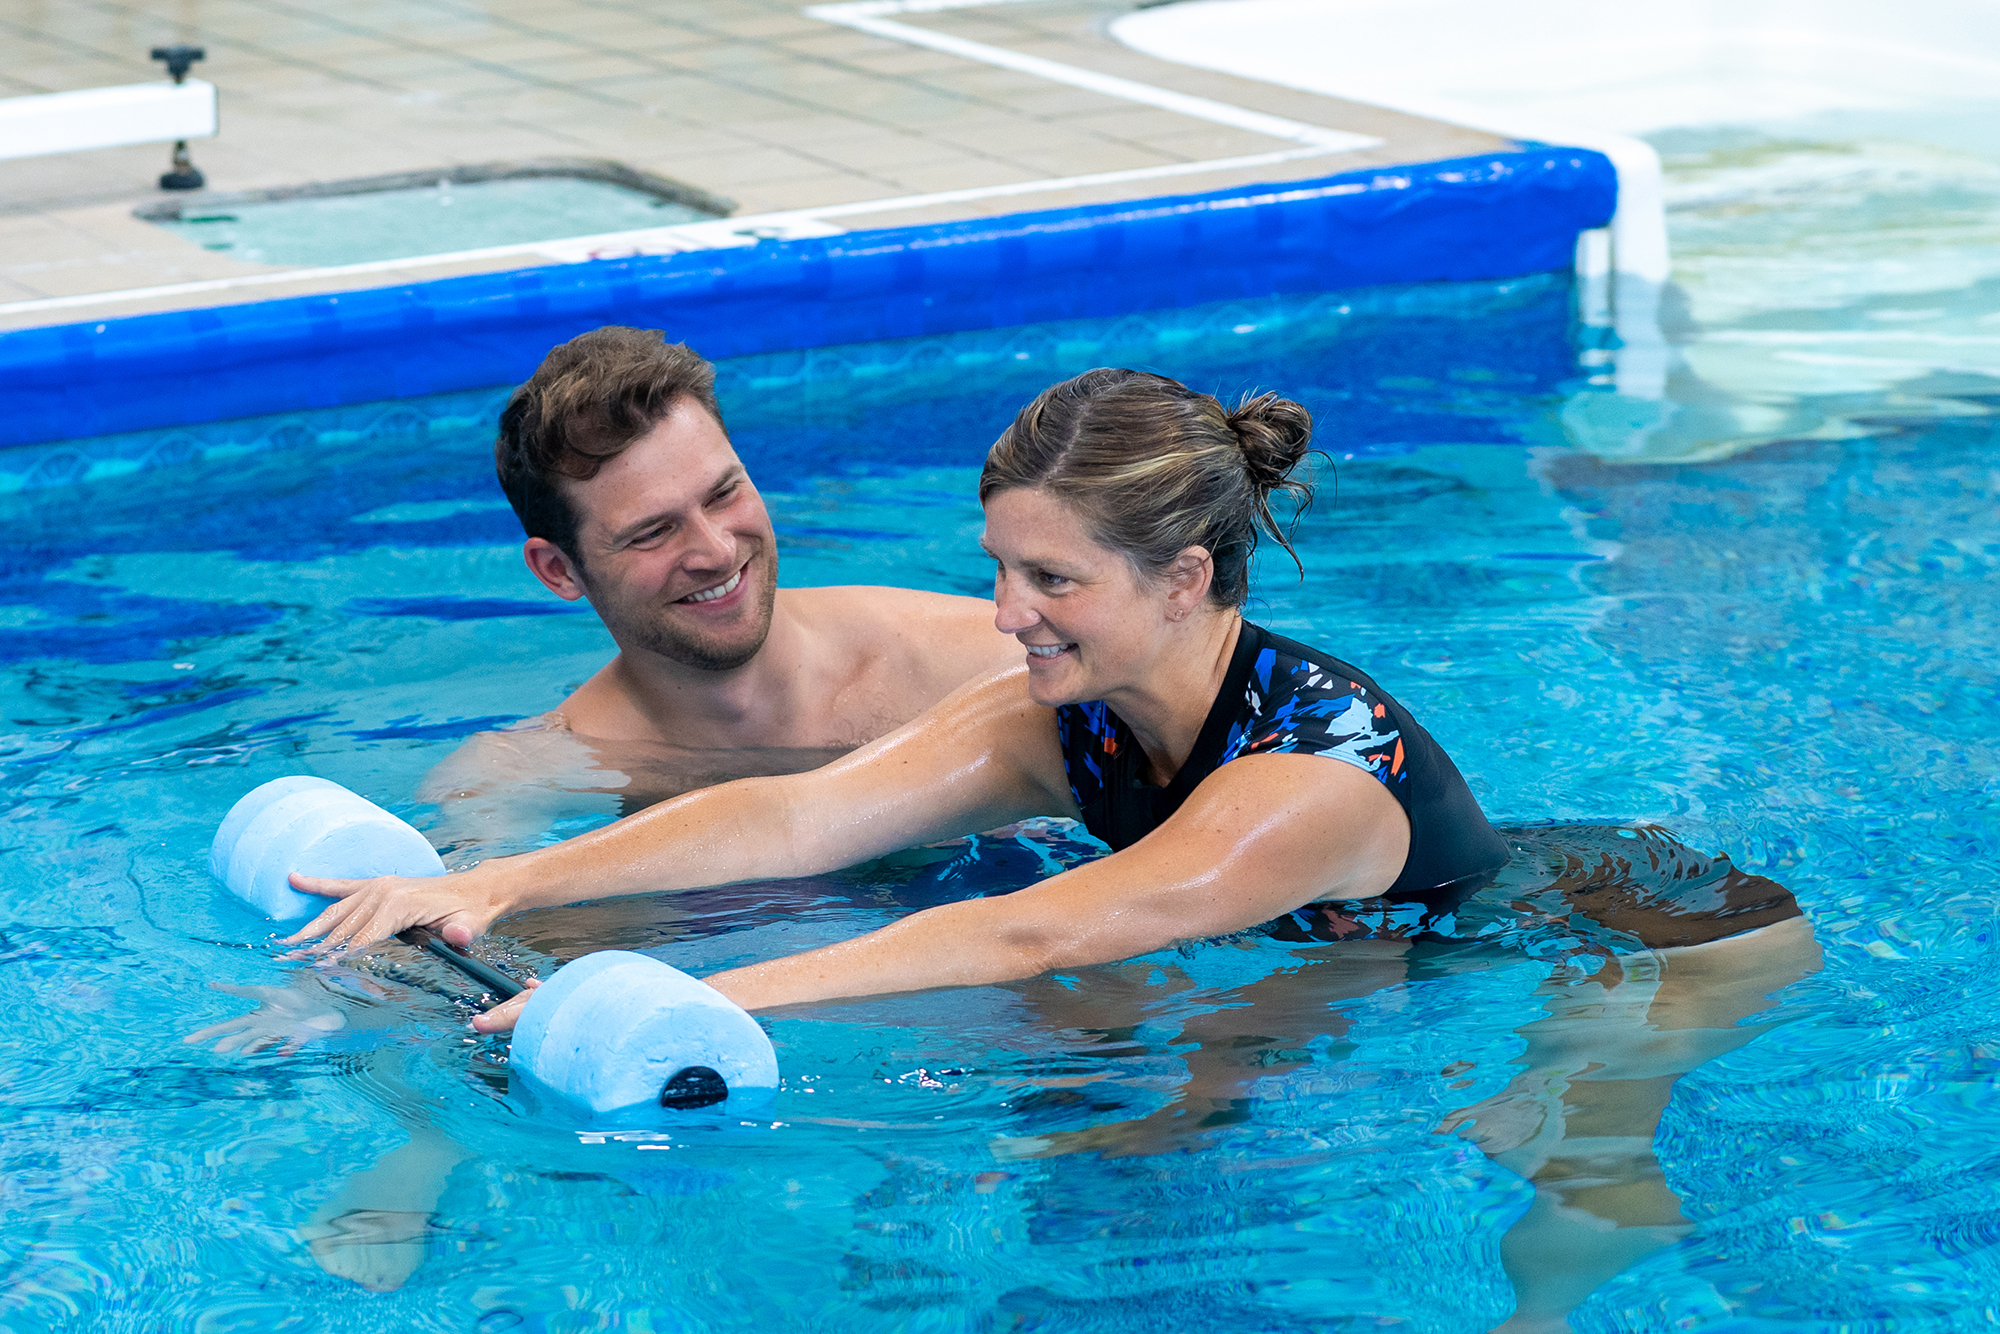 Warm water aquatic therapy provided by Aquacare